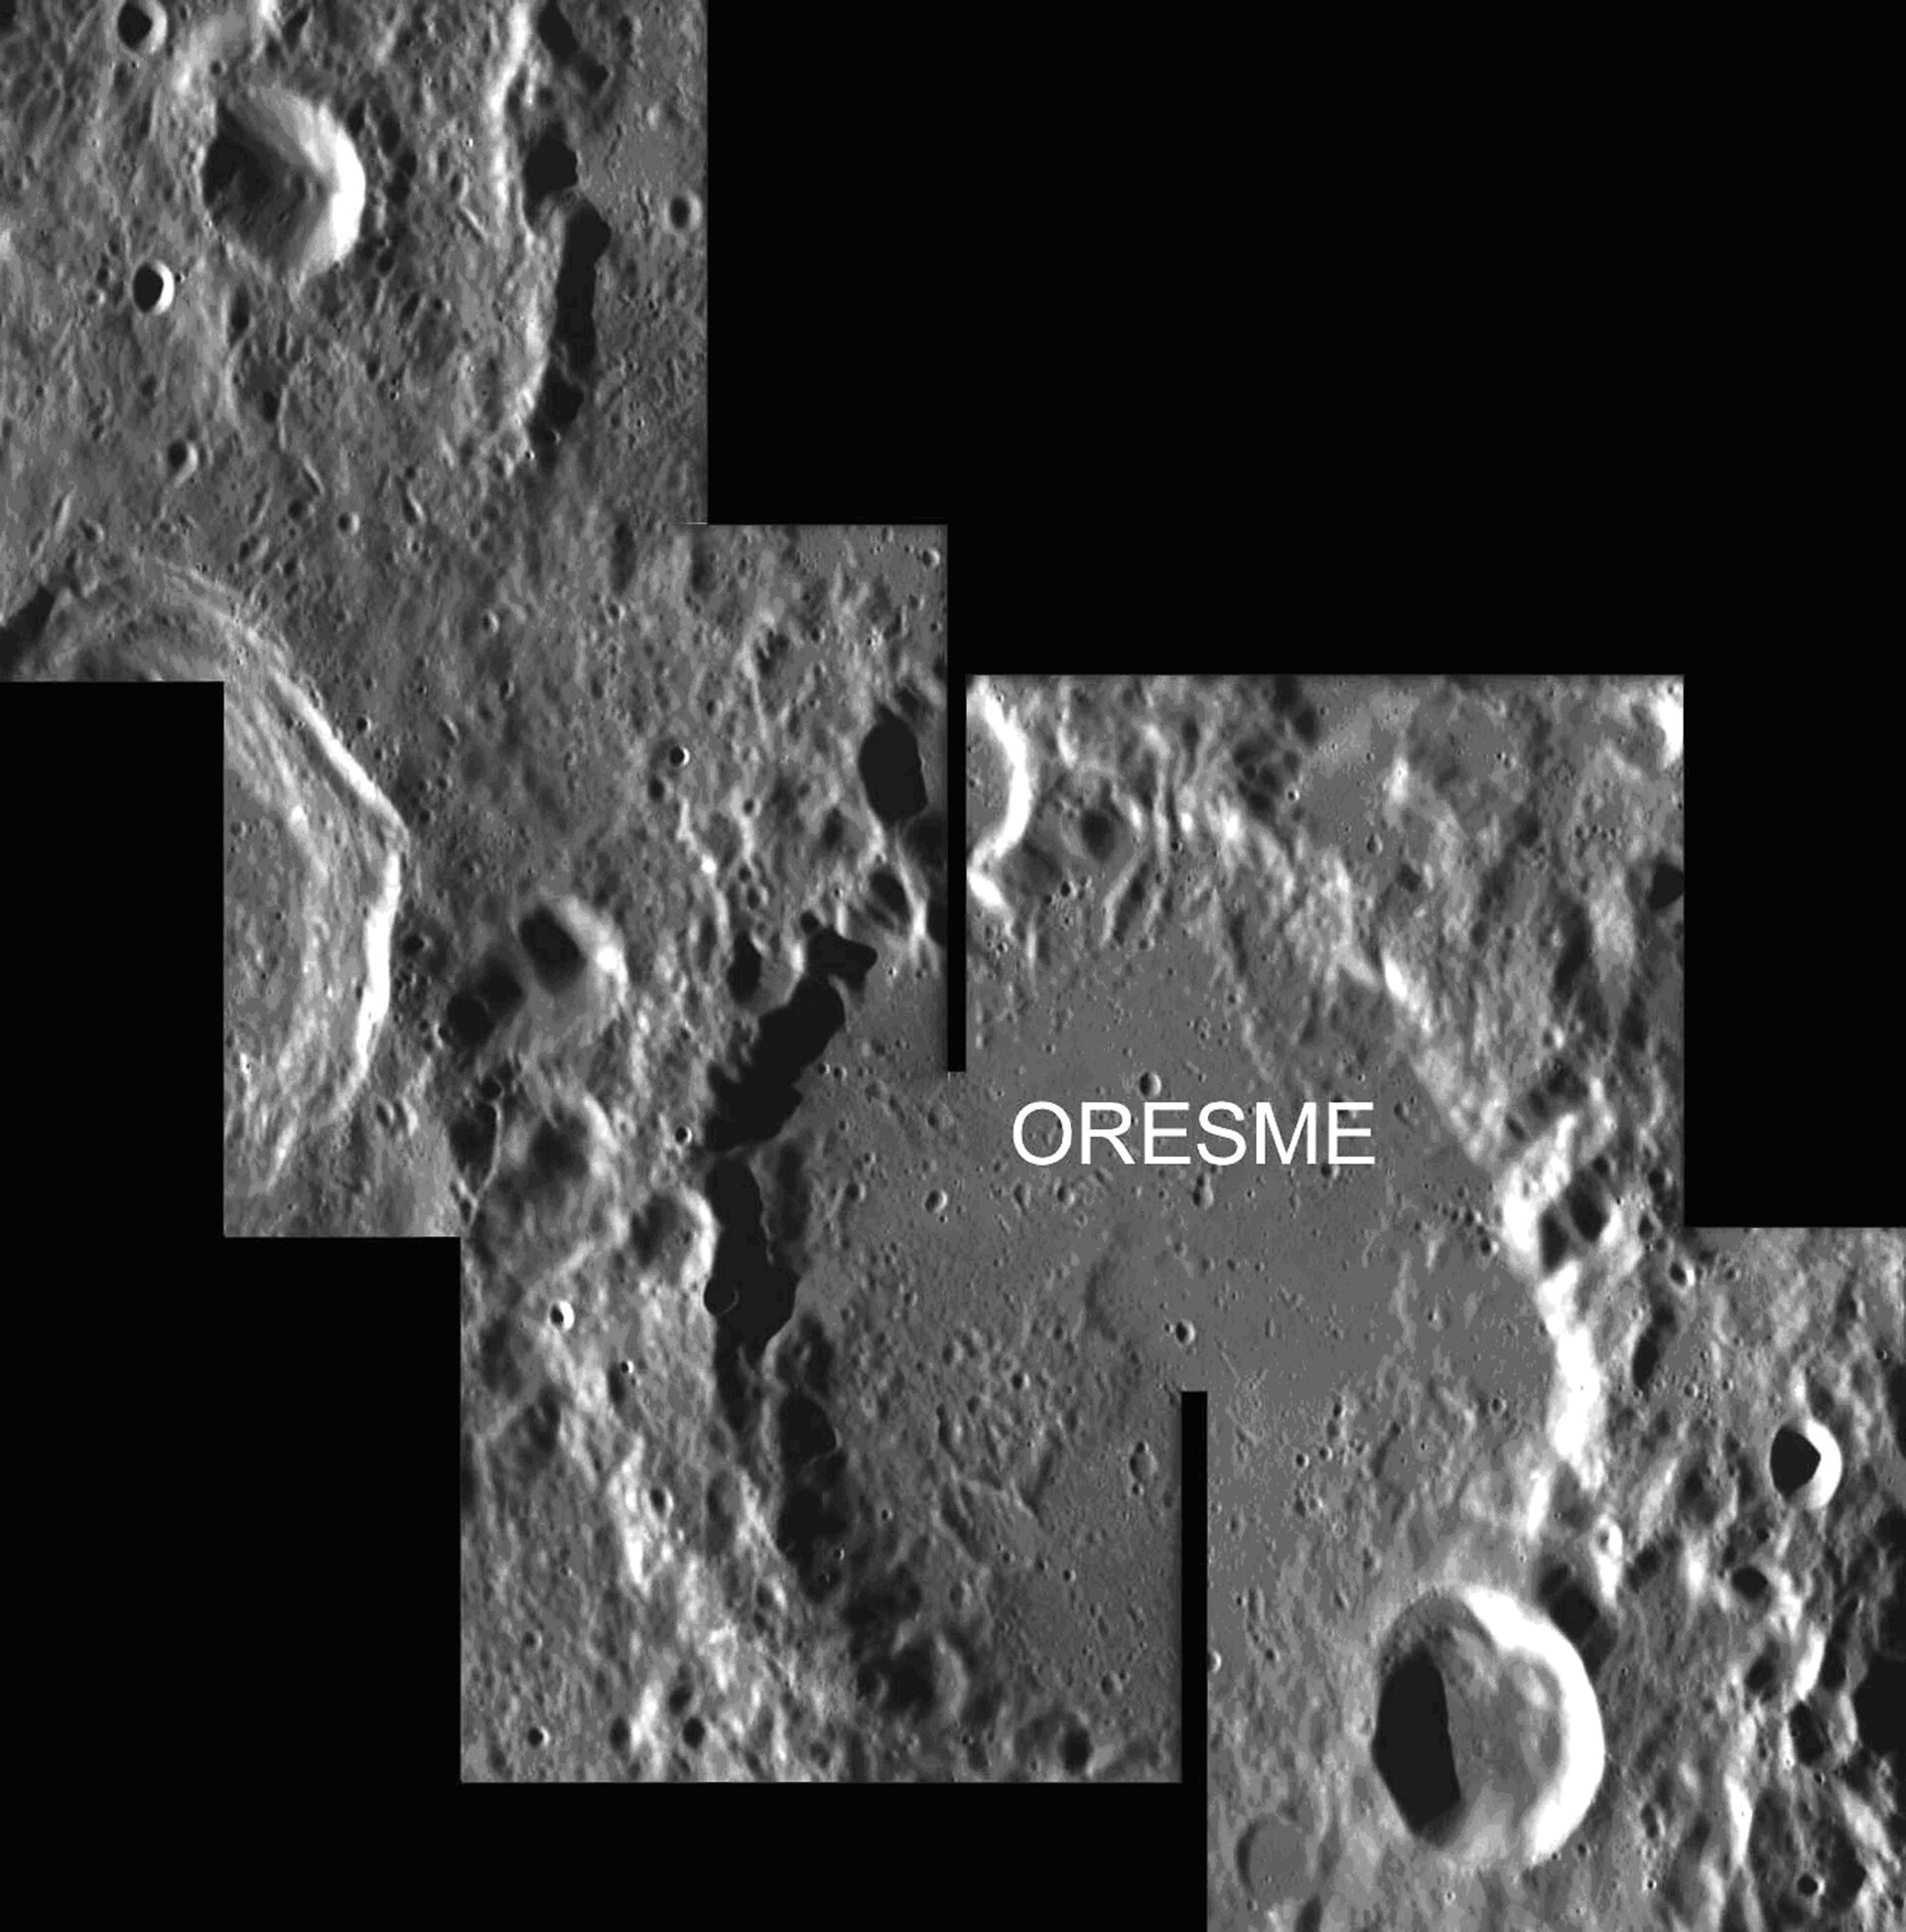 Oreseme: a crater located at the lunar south pole